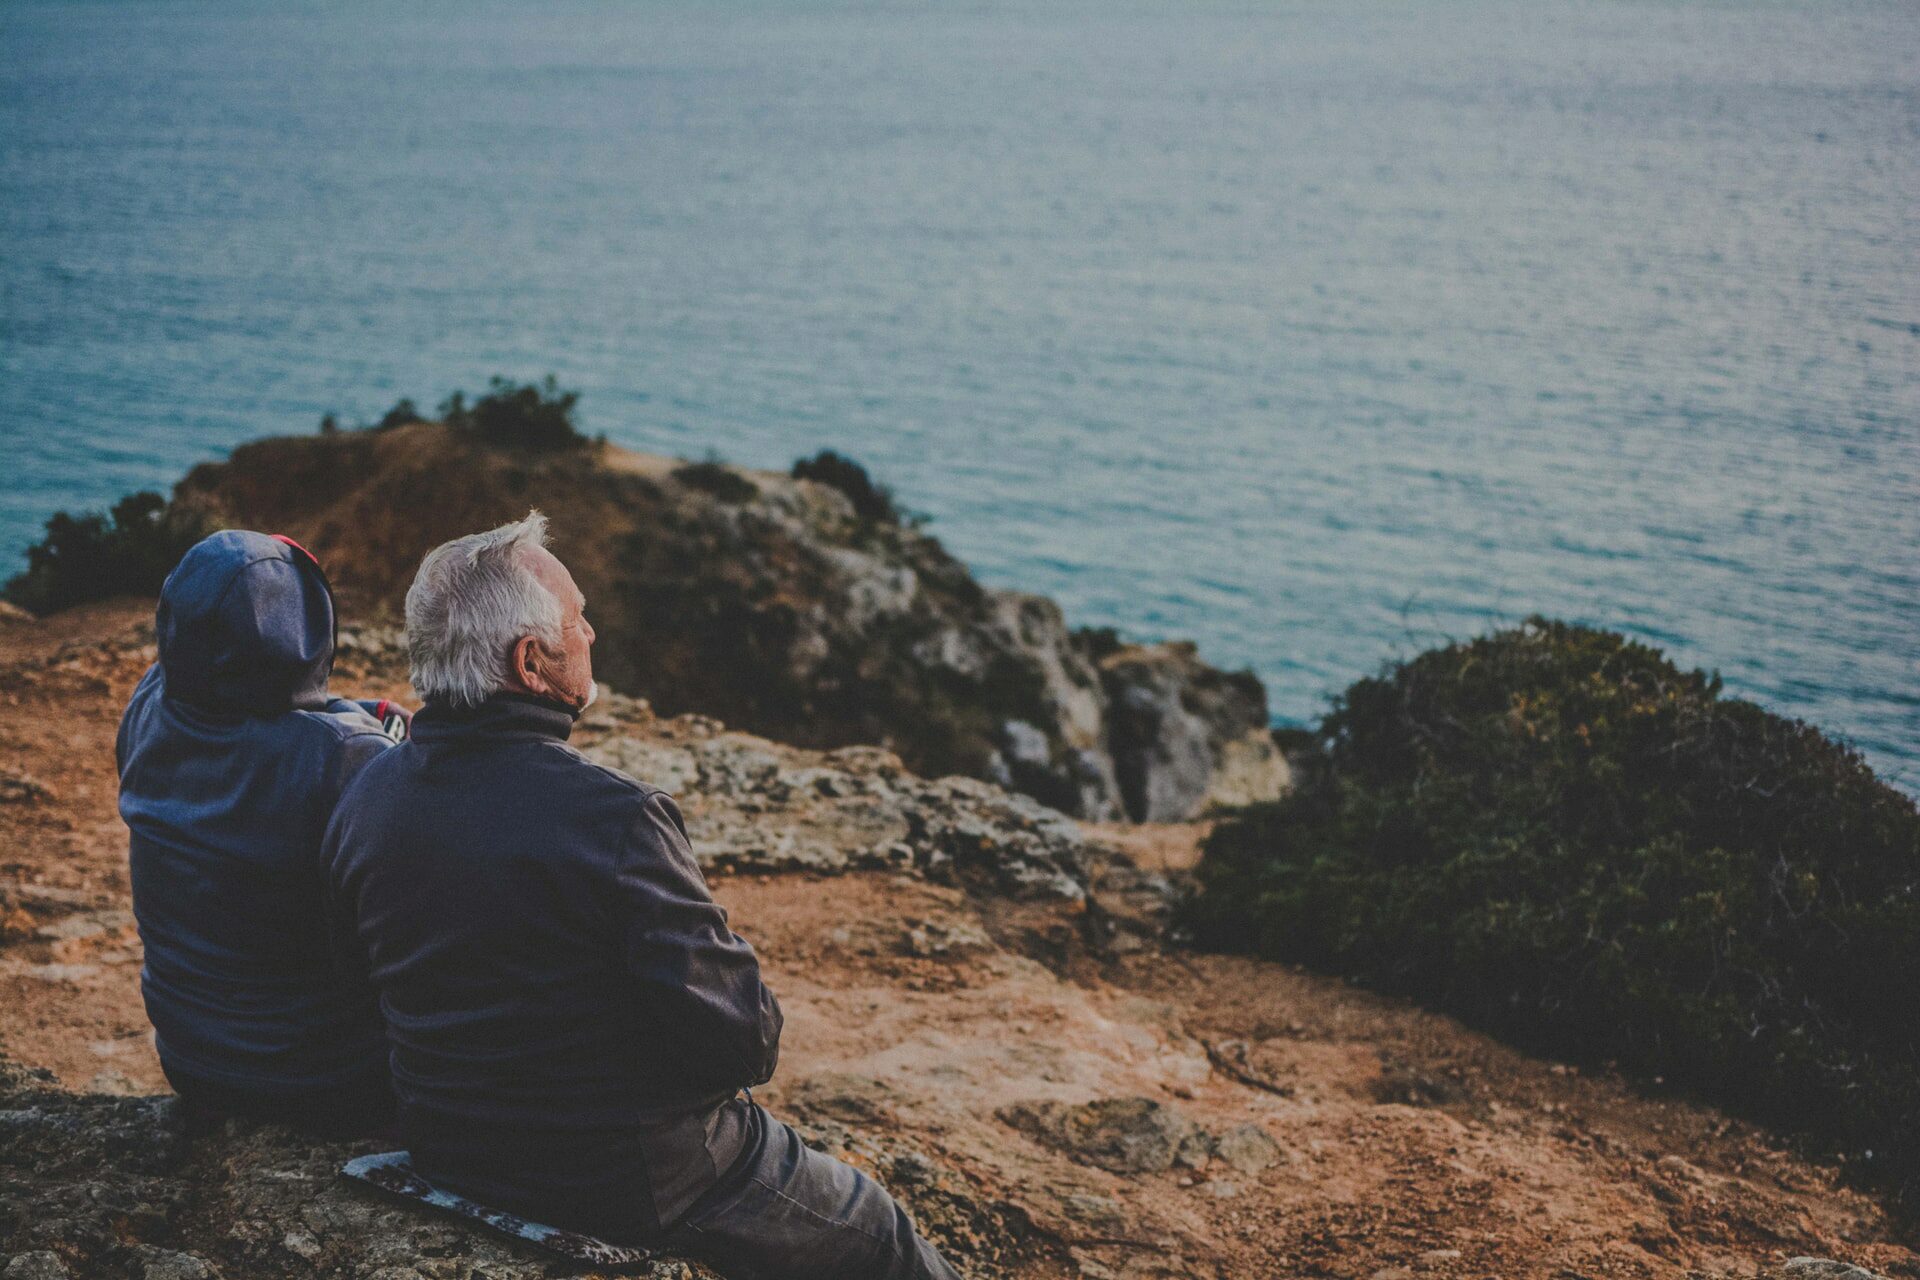 Retirement plans that integrate financial asset management, deferred annuities, and reverse mortgages can provide more spendable funds over a retiree’s lifespan, according to Jack Guttentag on the RetireSecure blog.